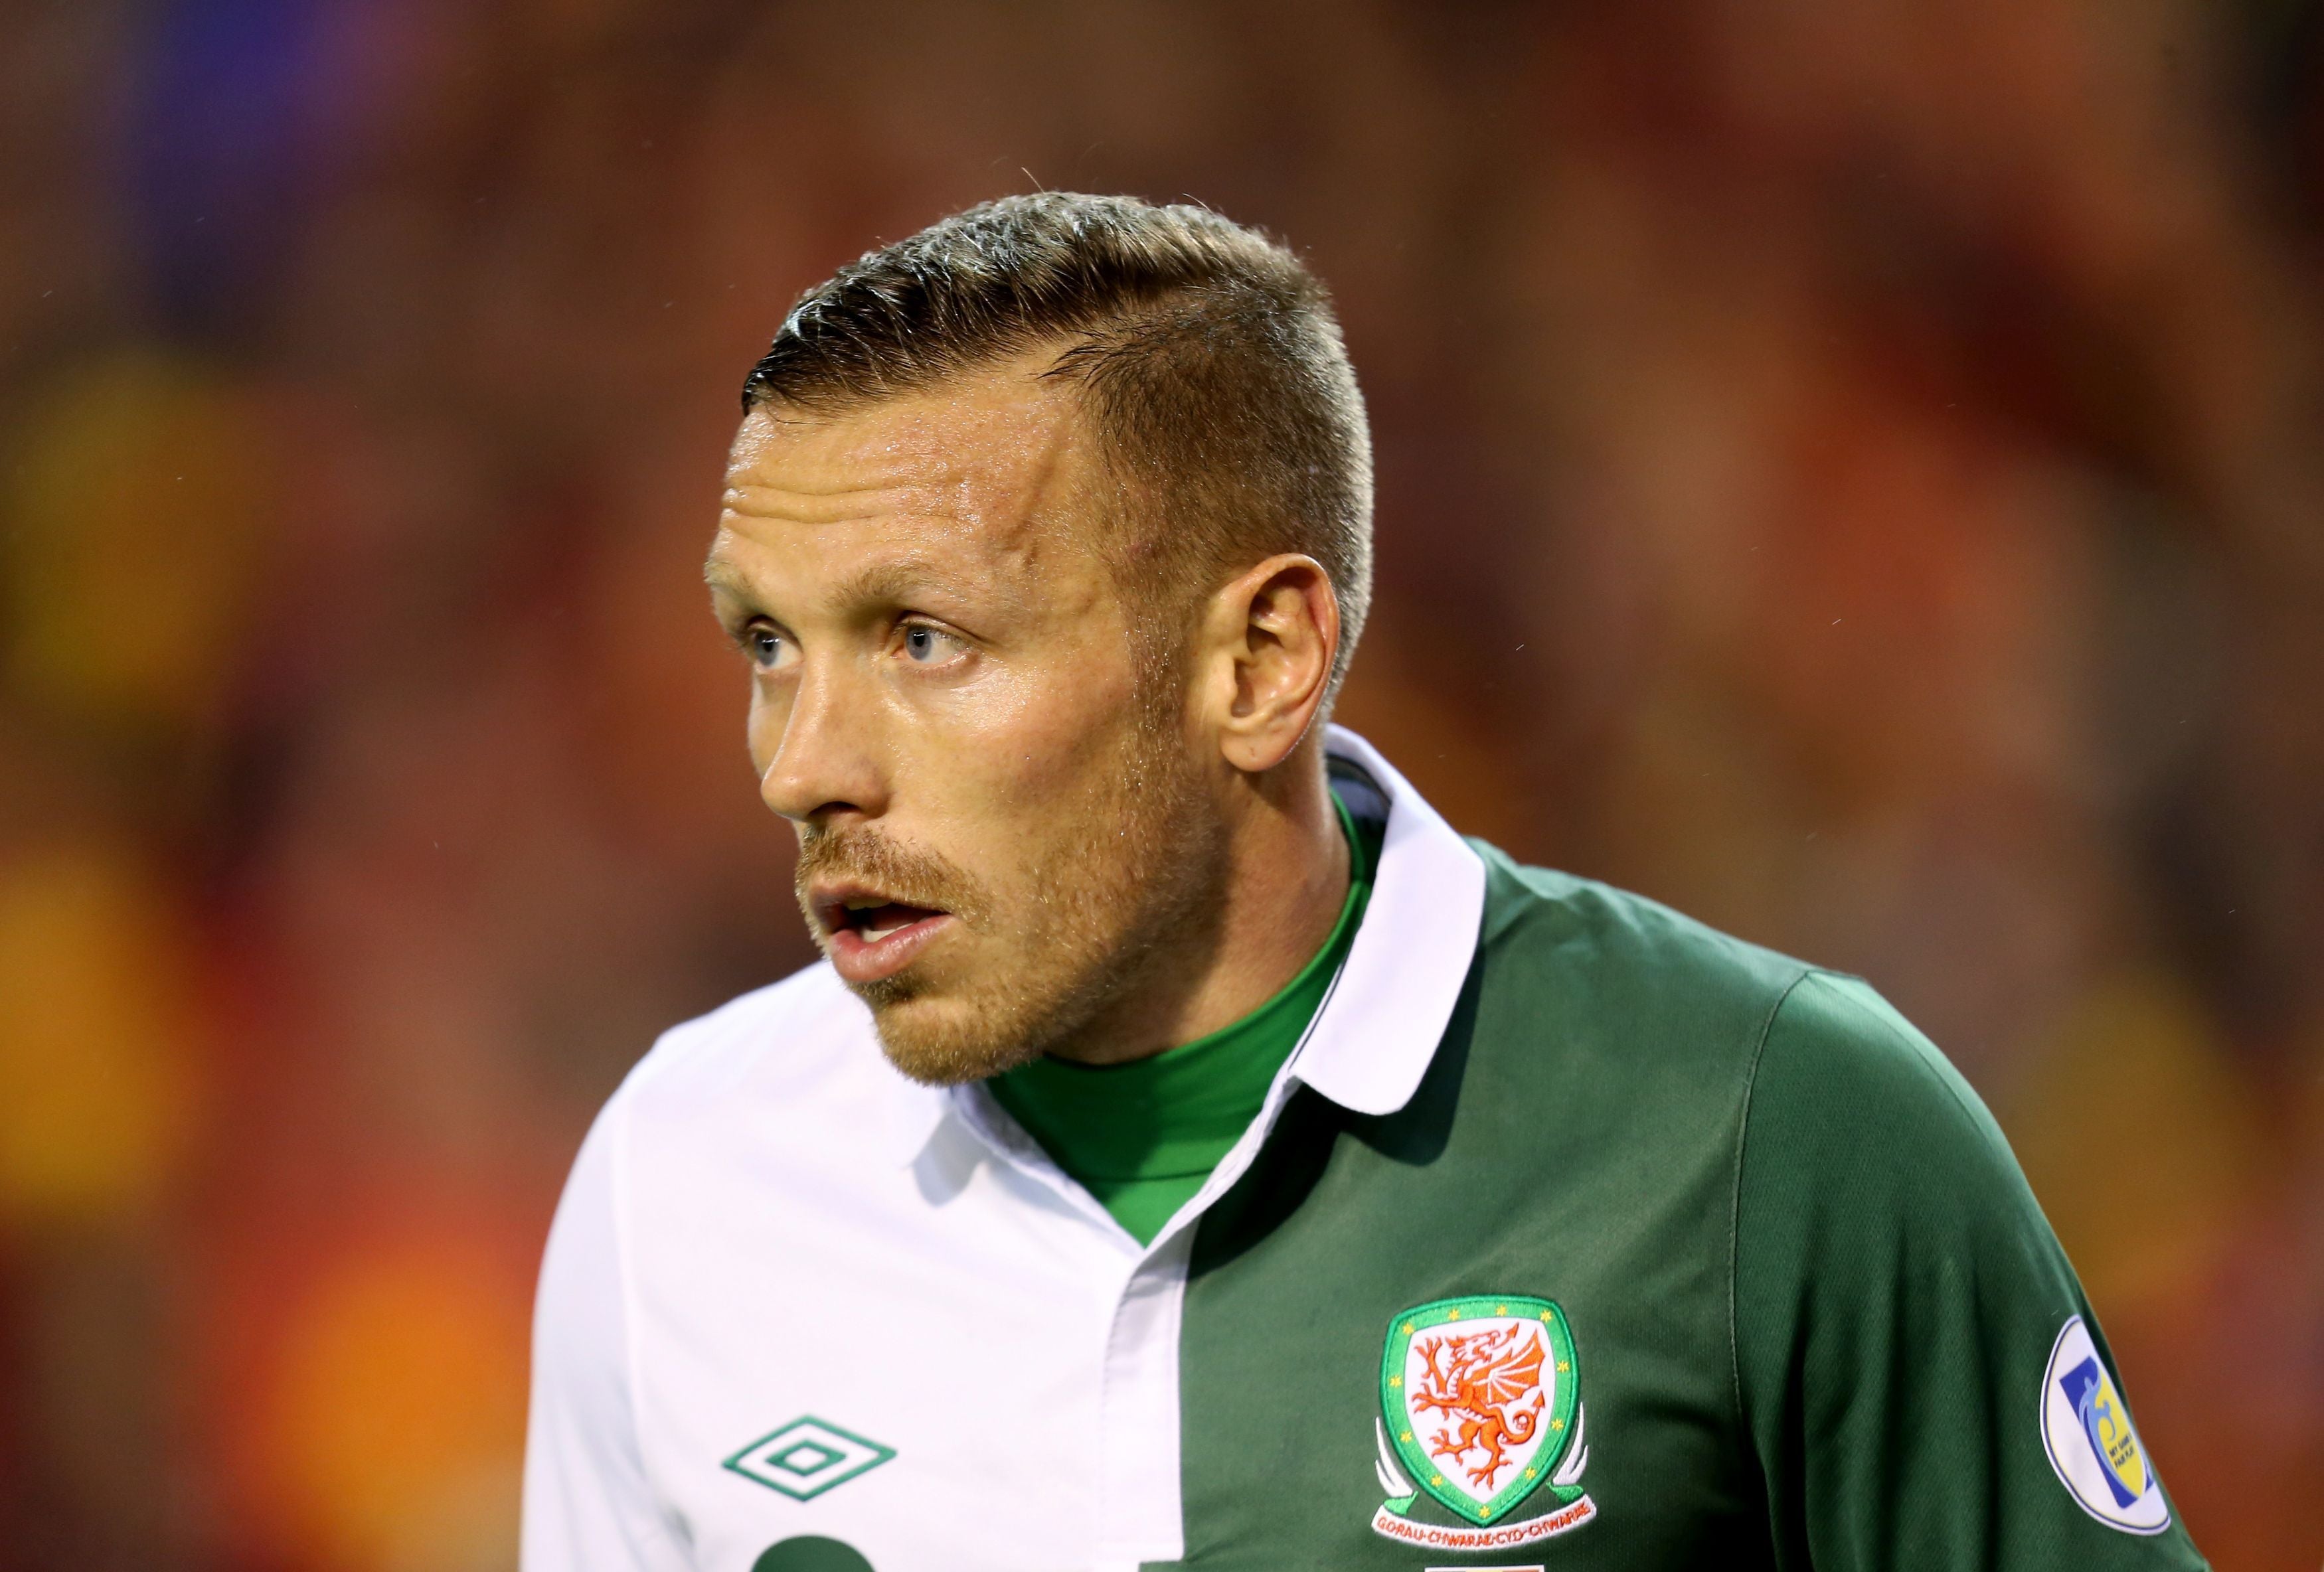 Craig Bellamy was capped 78 times by Wales